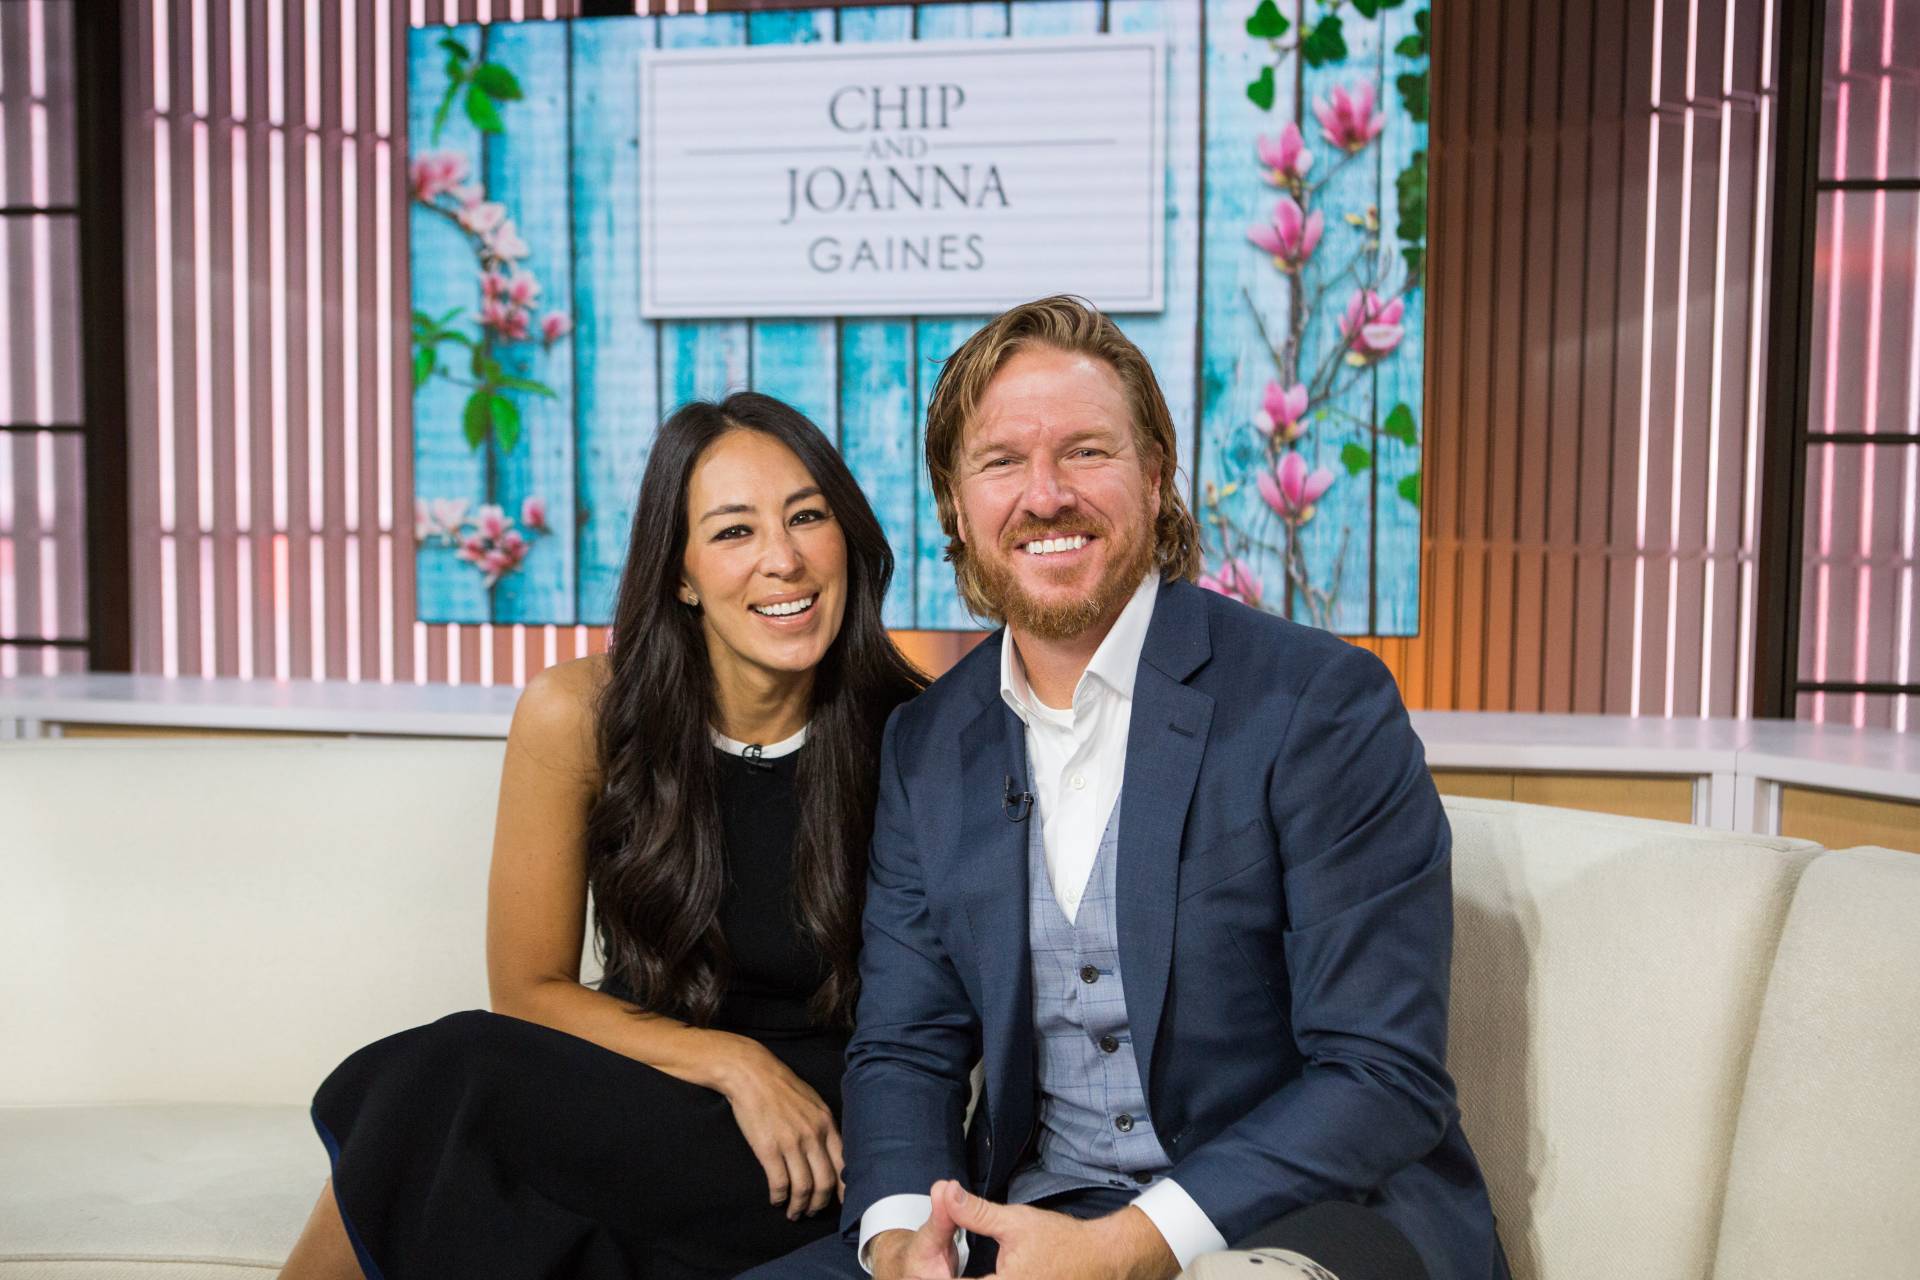 Joanna and Chip Gaines | Nathan Congleton/NBCU Photo Bank/NBCUniversal via Getty Images 